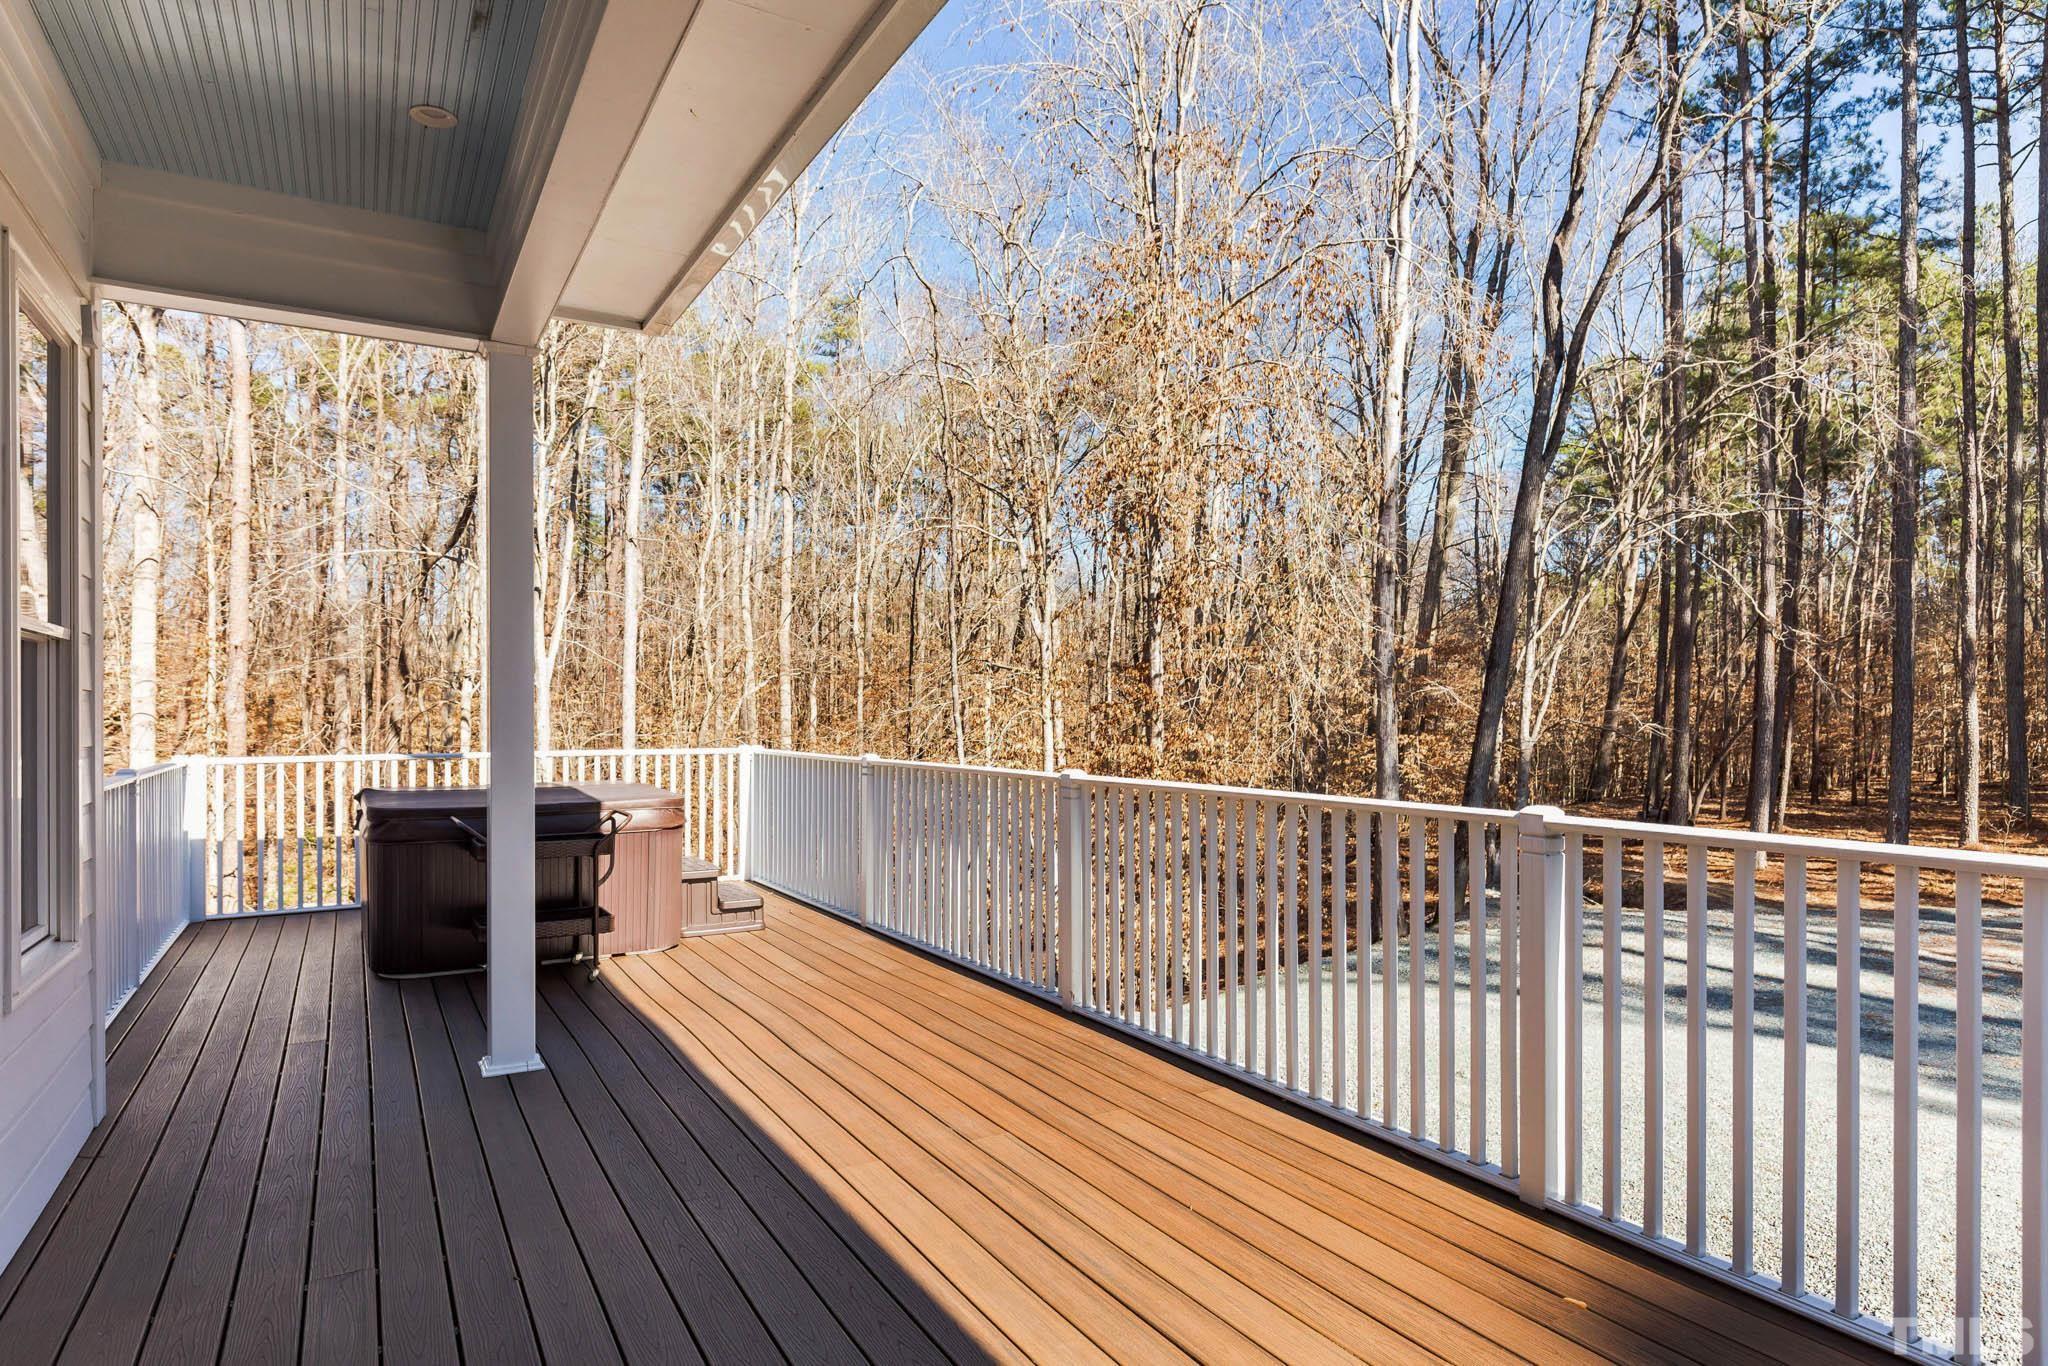 Deck only accessible from the master bathroom